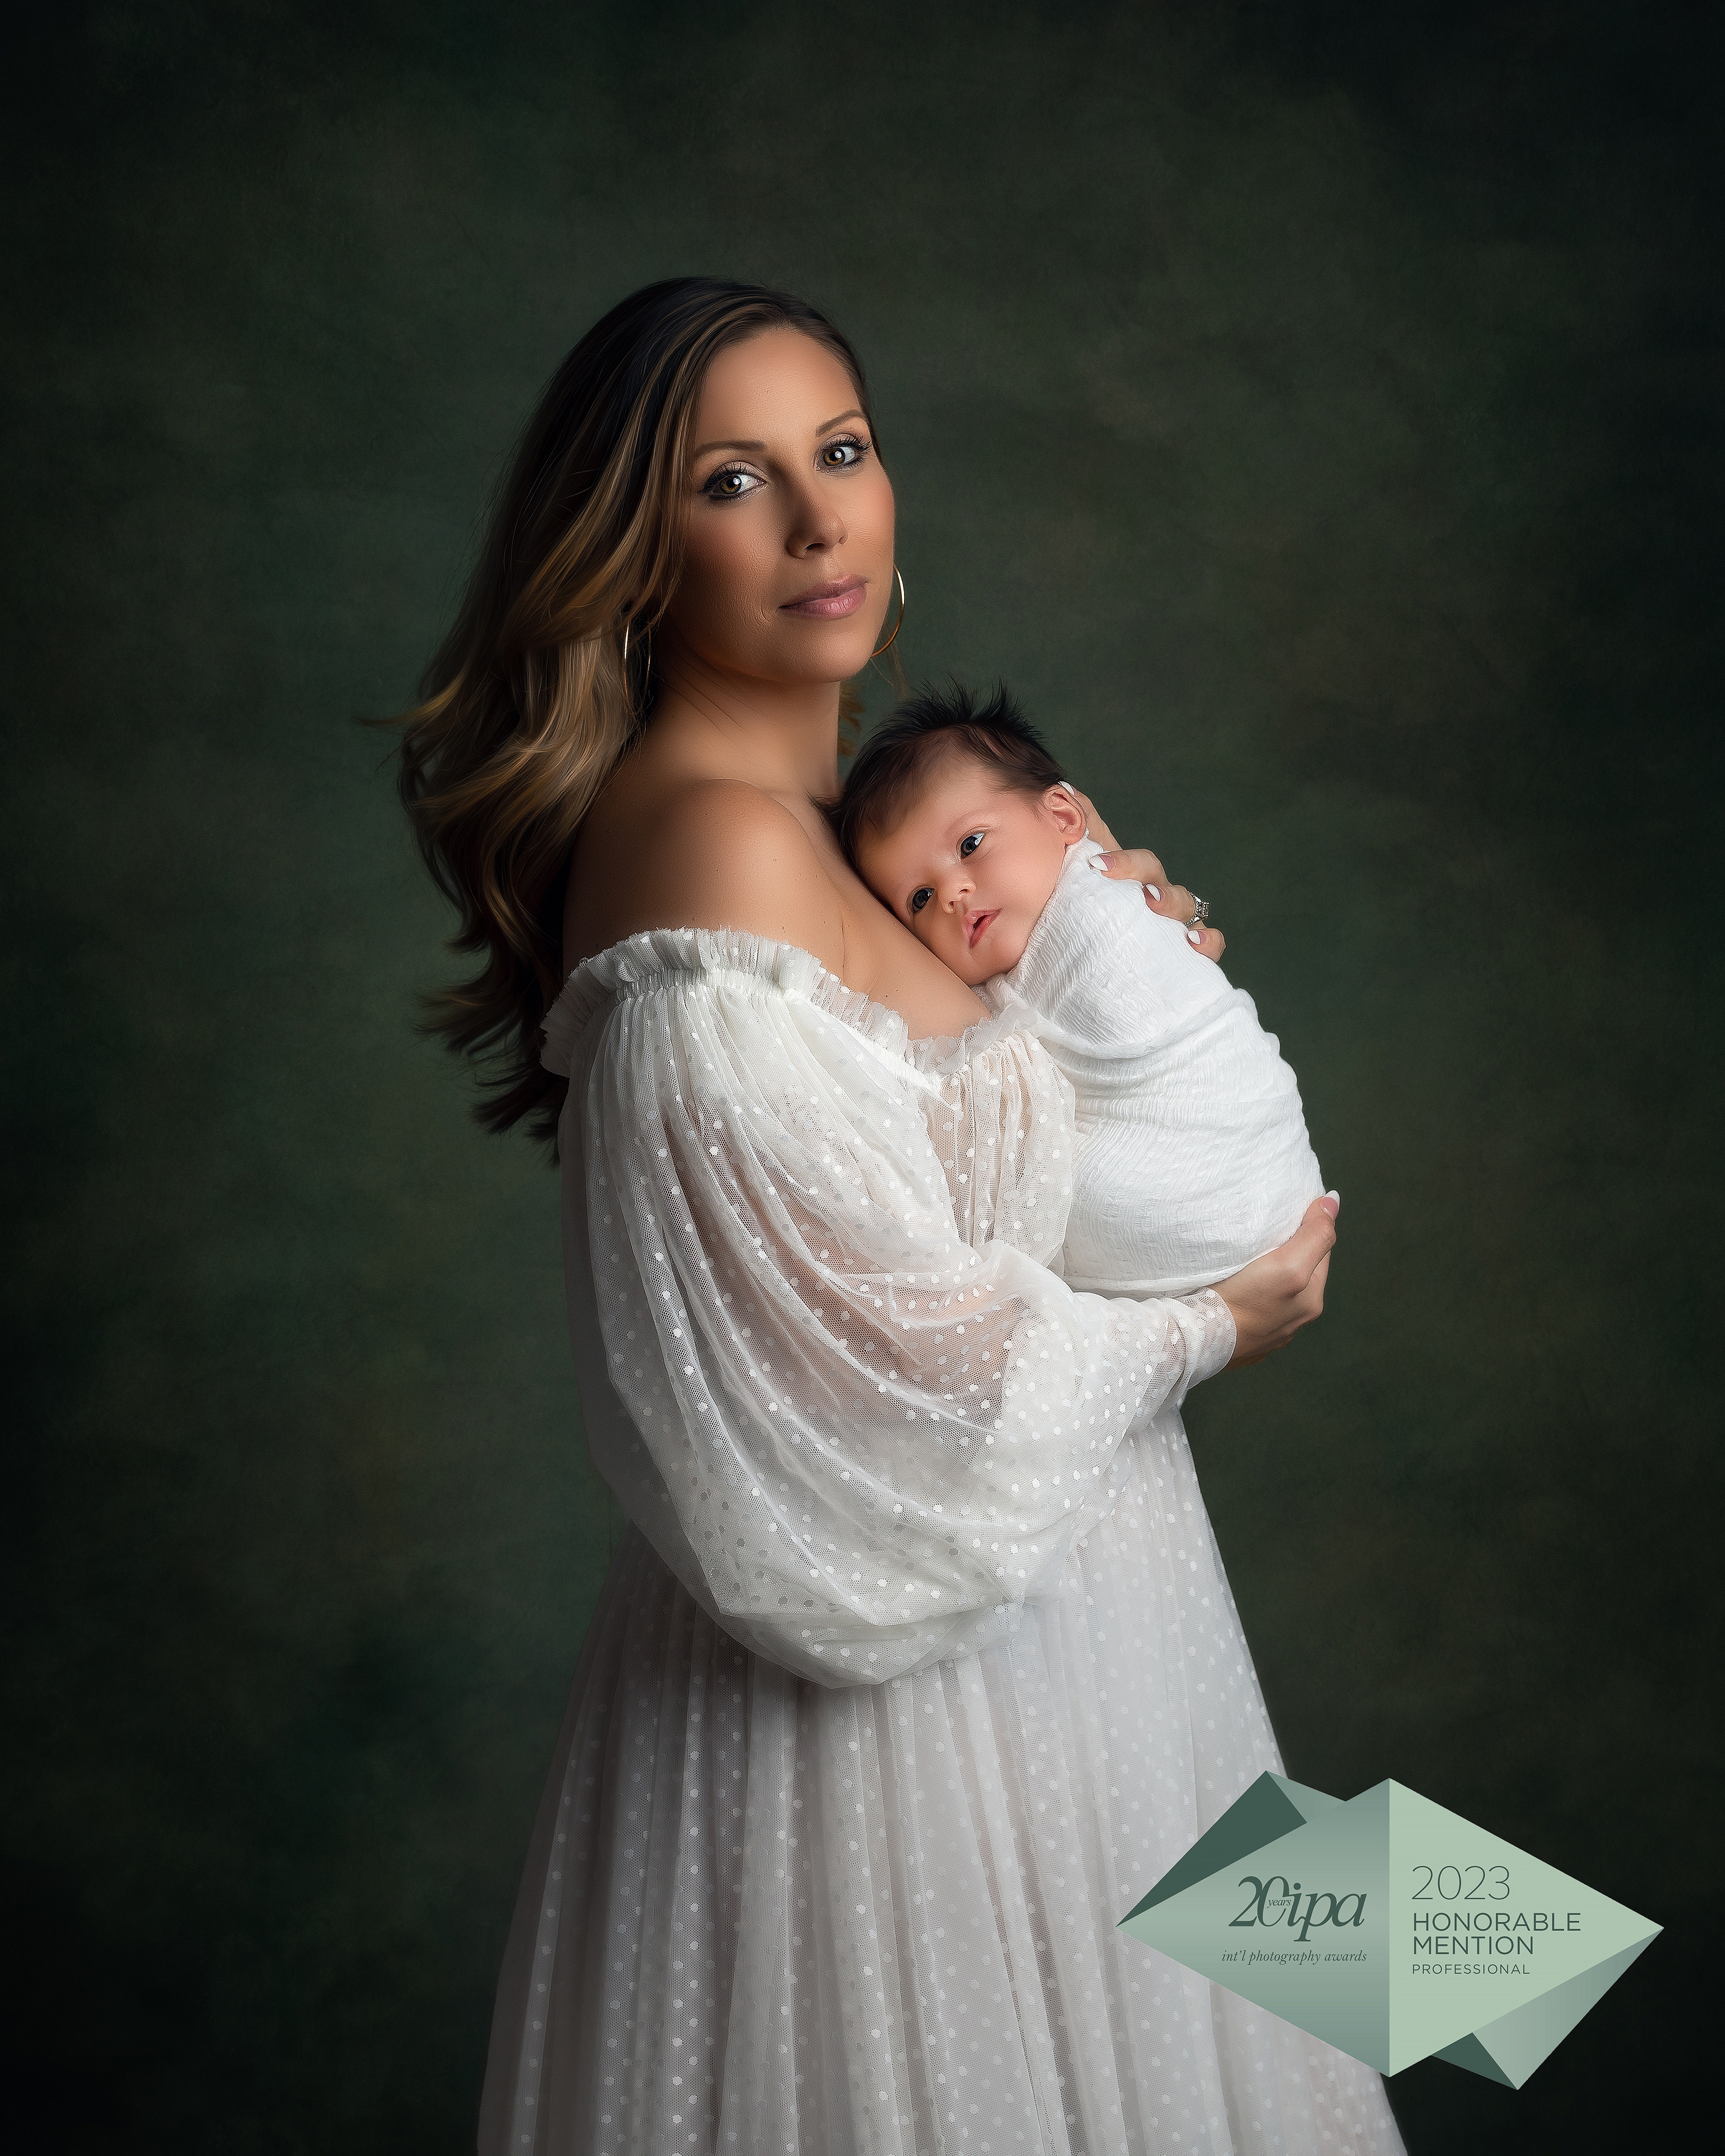 Newborn Photographer, a mother wears a white dress and holds her baby against a dark green studio backdrop